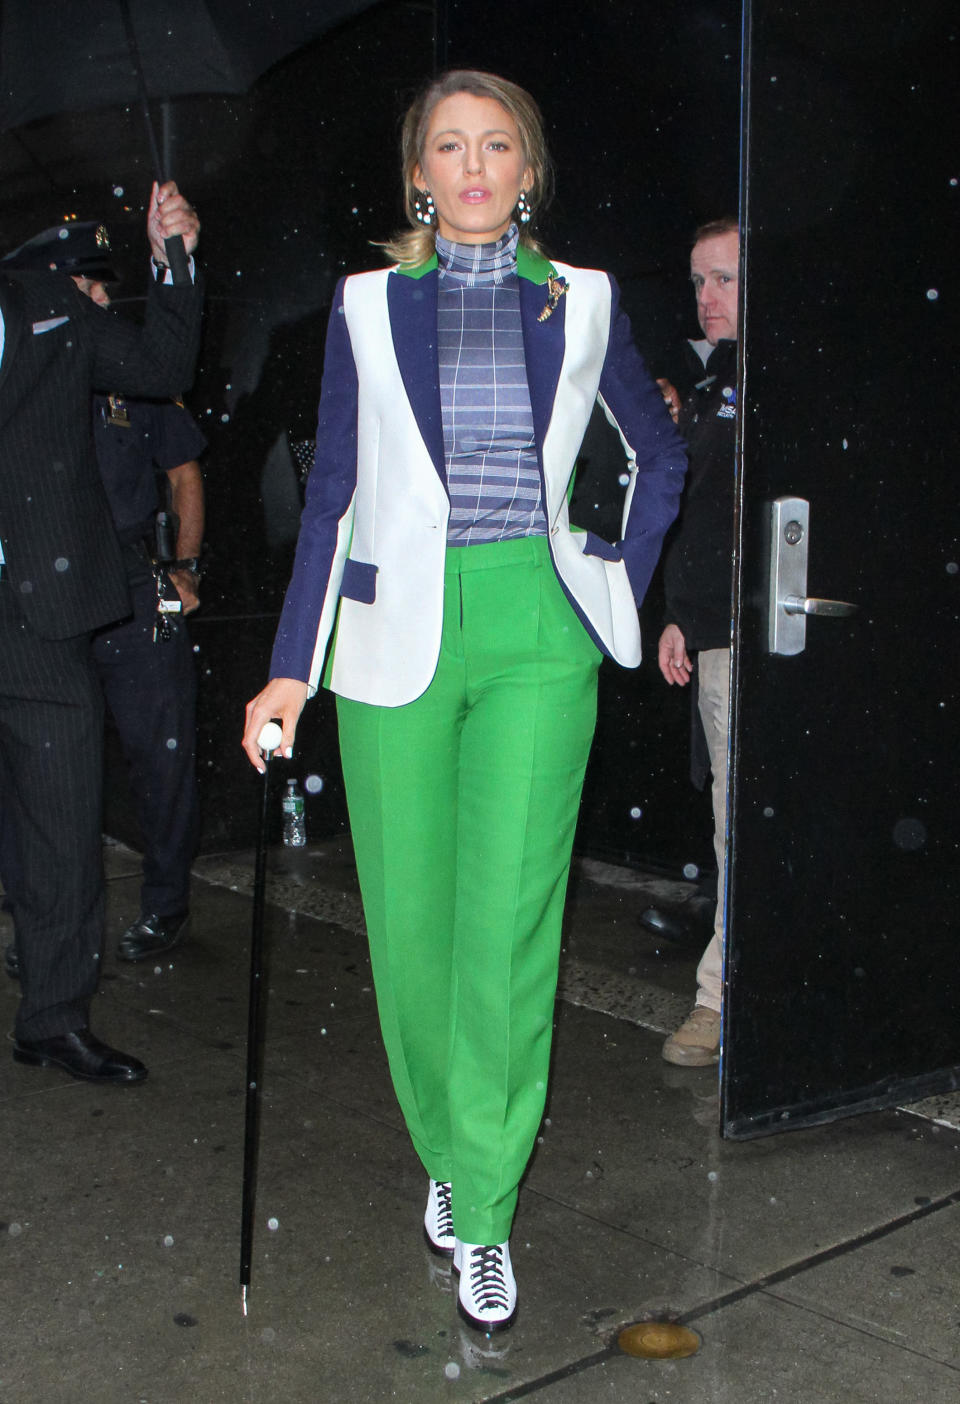 She opted for this green, blue and white color-blocked look for her appearance on &ldquo;Live With Kelly &amp; Ryan&rdquo; on the same day.